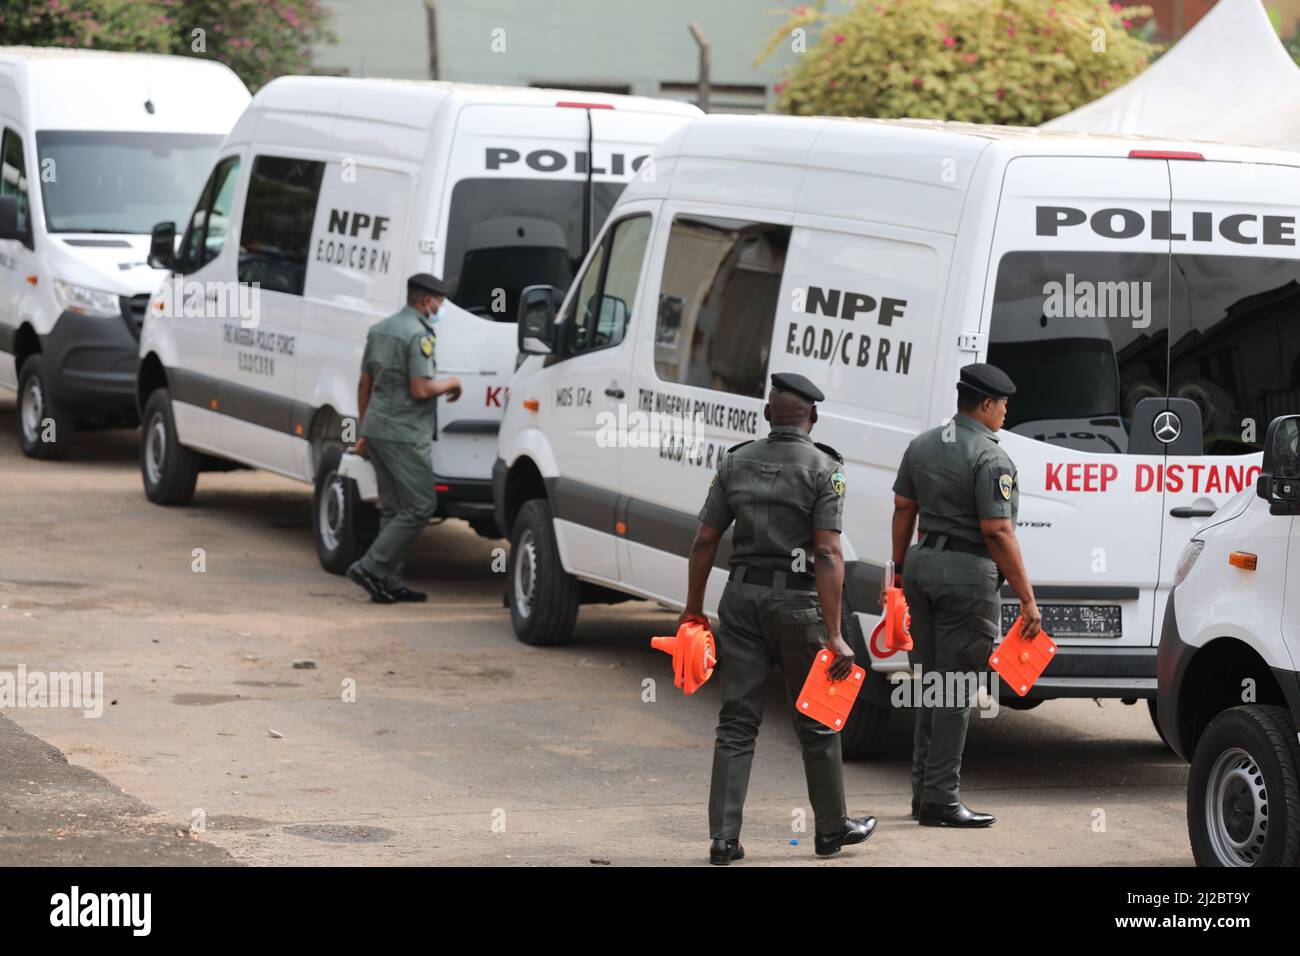 Police personnel’s training on the operation of the detection equipment to combat the smuggling of nuclear and radioactive material in Lagos, Nigeria. The United States donated nuclear detection system vans and equipment to the explosive ordnance disposal (EOD) command of the Nigeria Police Force (NPF). Lagos, Nigeria. Stock Photo